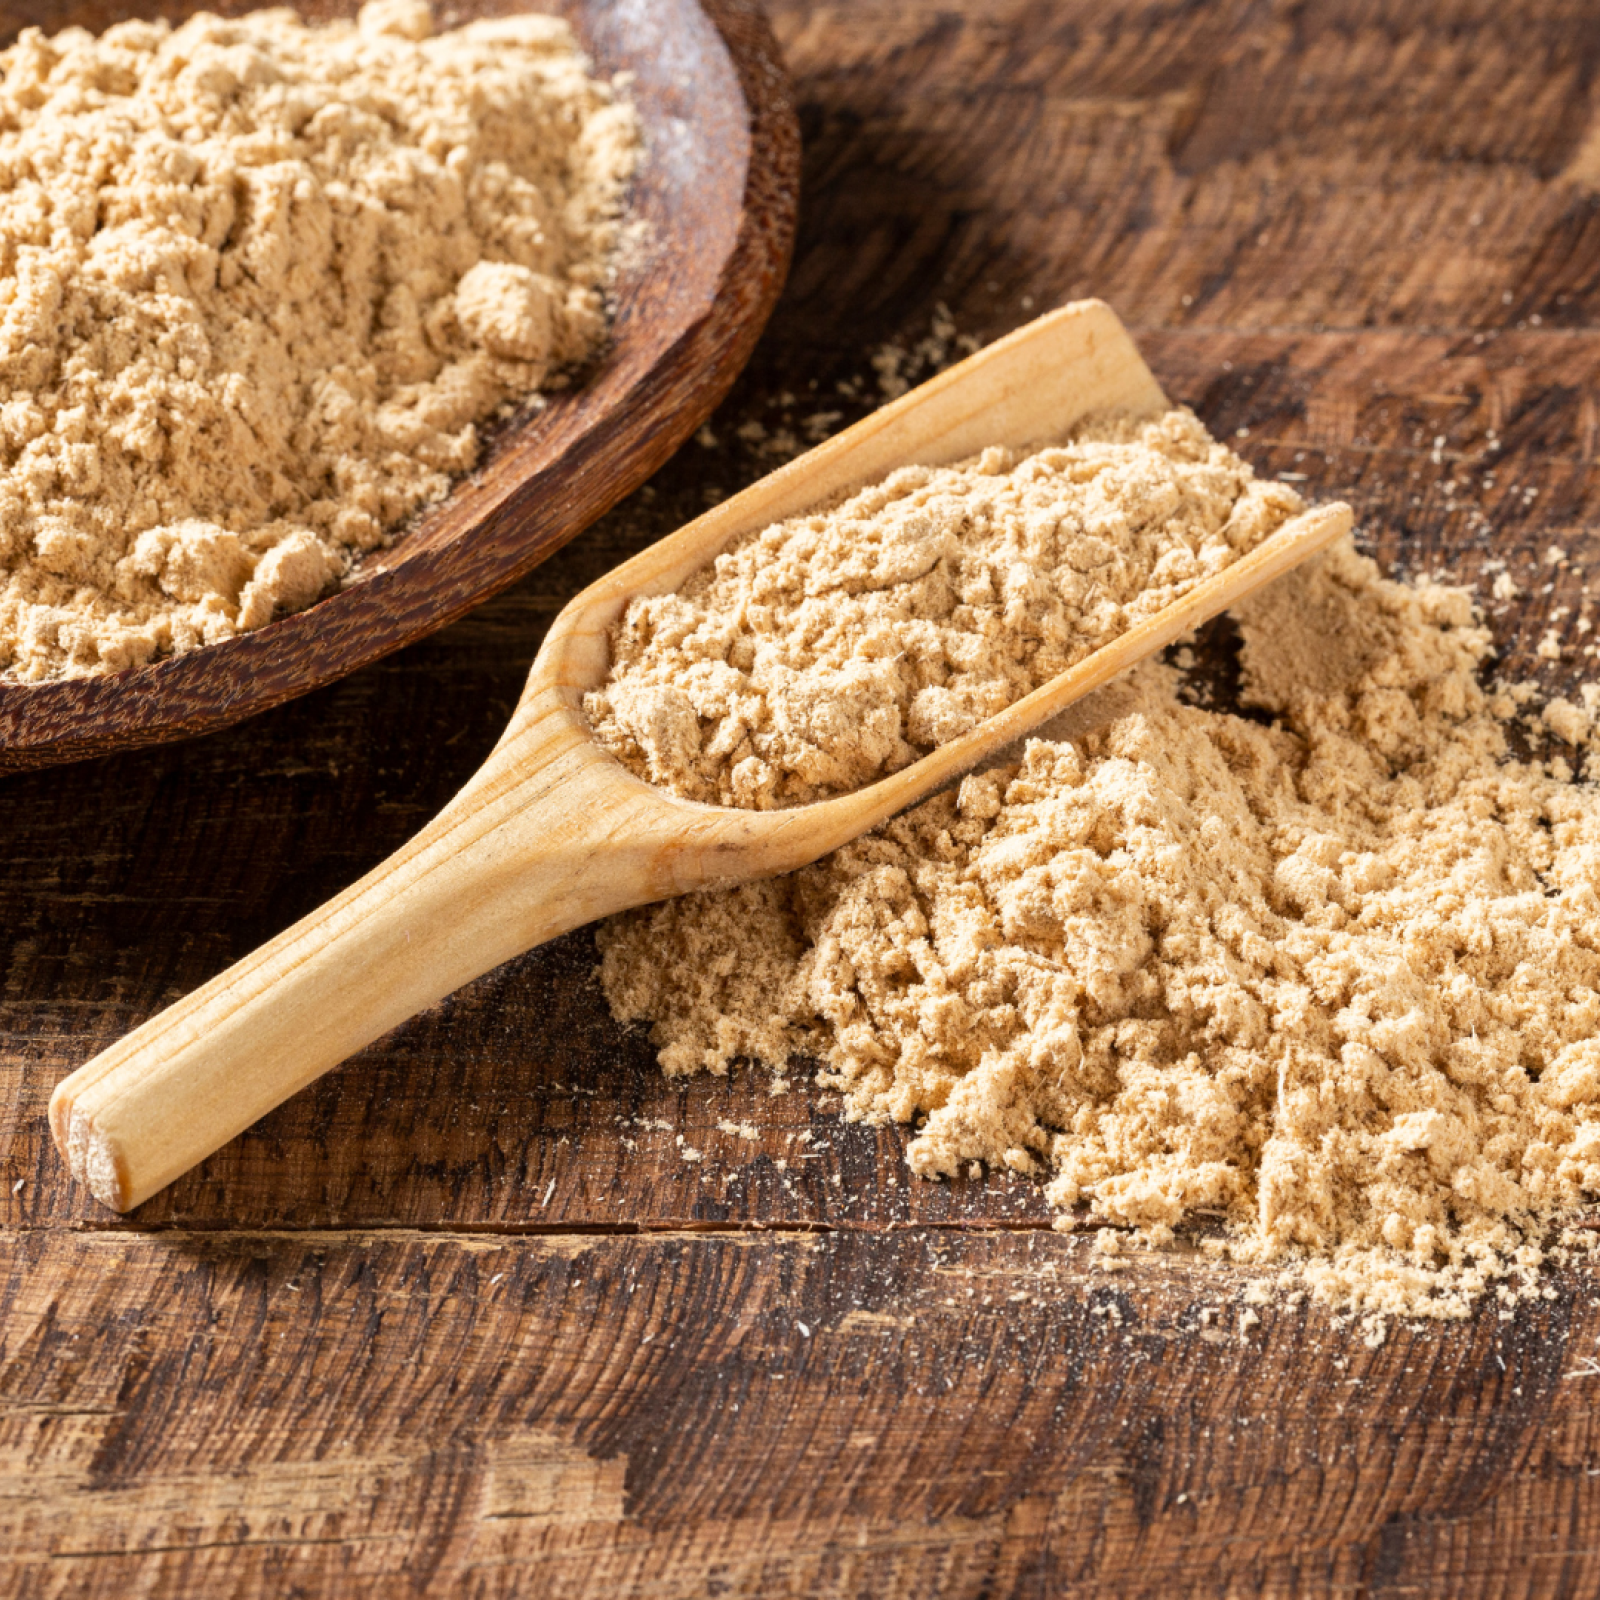 Is maca an adaptogen that's important for sexual health?